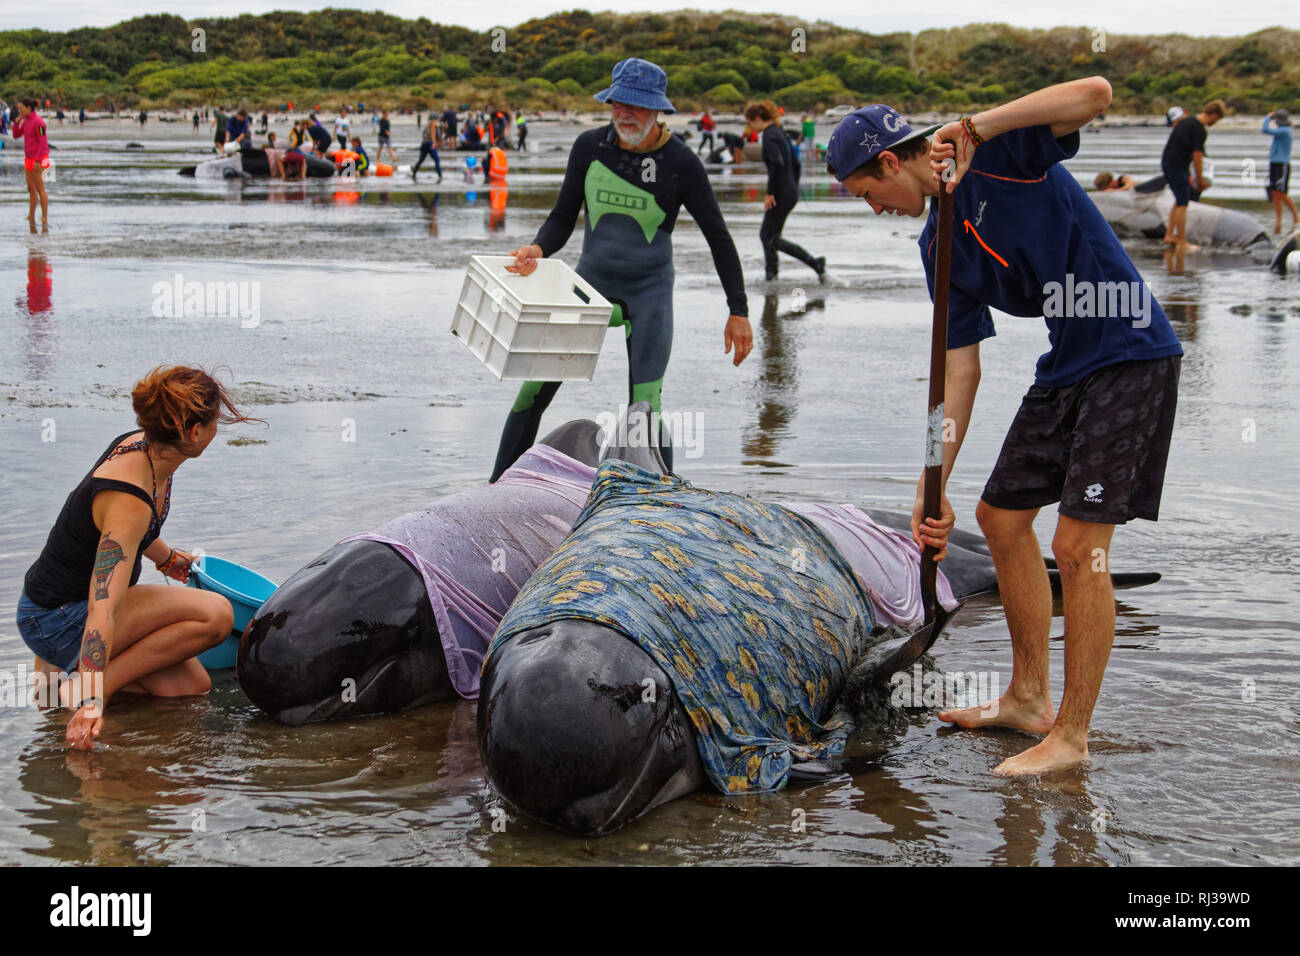 Stranded pilot whale beached on Farewell Spit at the northern tip of New Zealand's South Island, being cared for by volunteers. Stock Photo